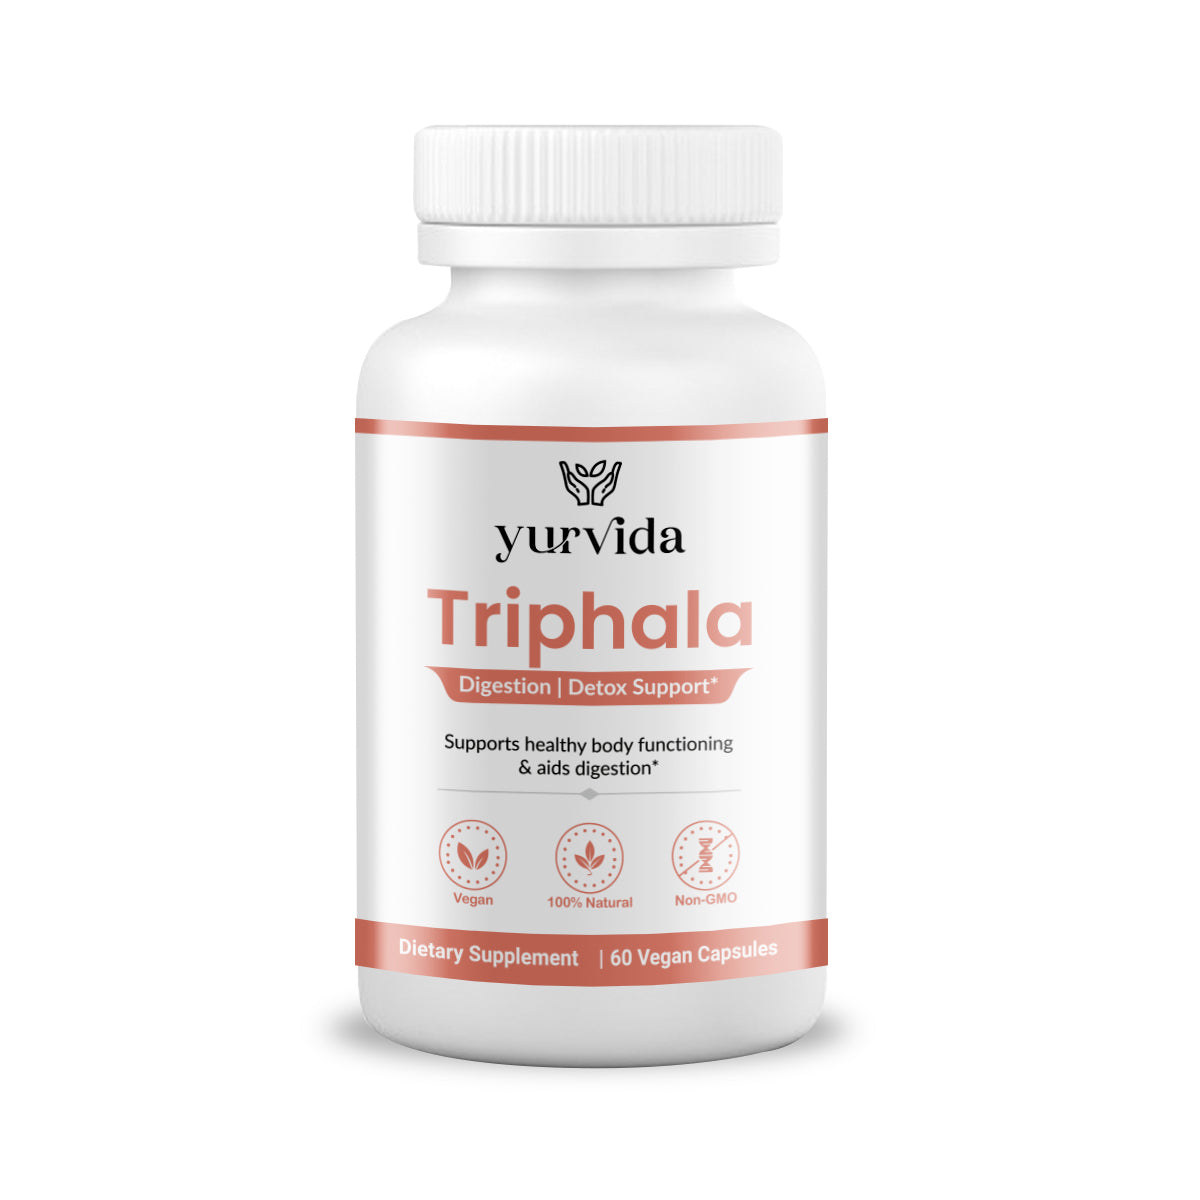 Triphala - Purified Extract to Aid Digestion & Support Detoxification*